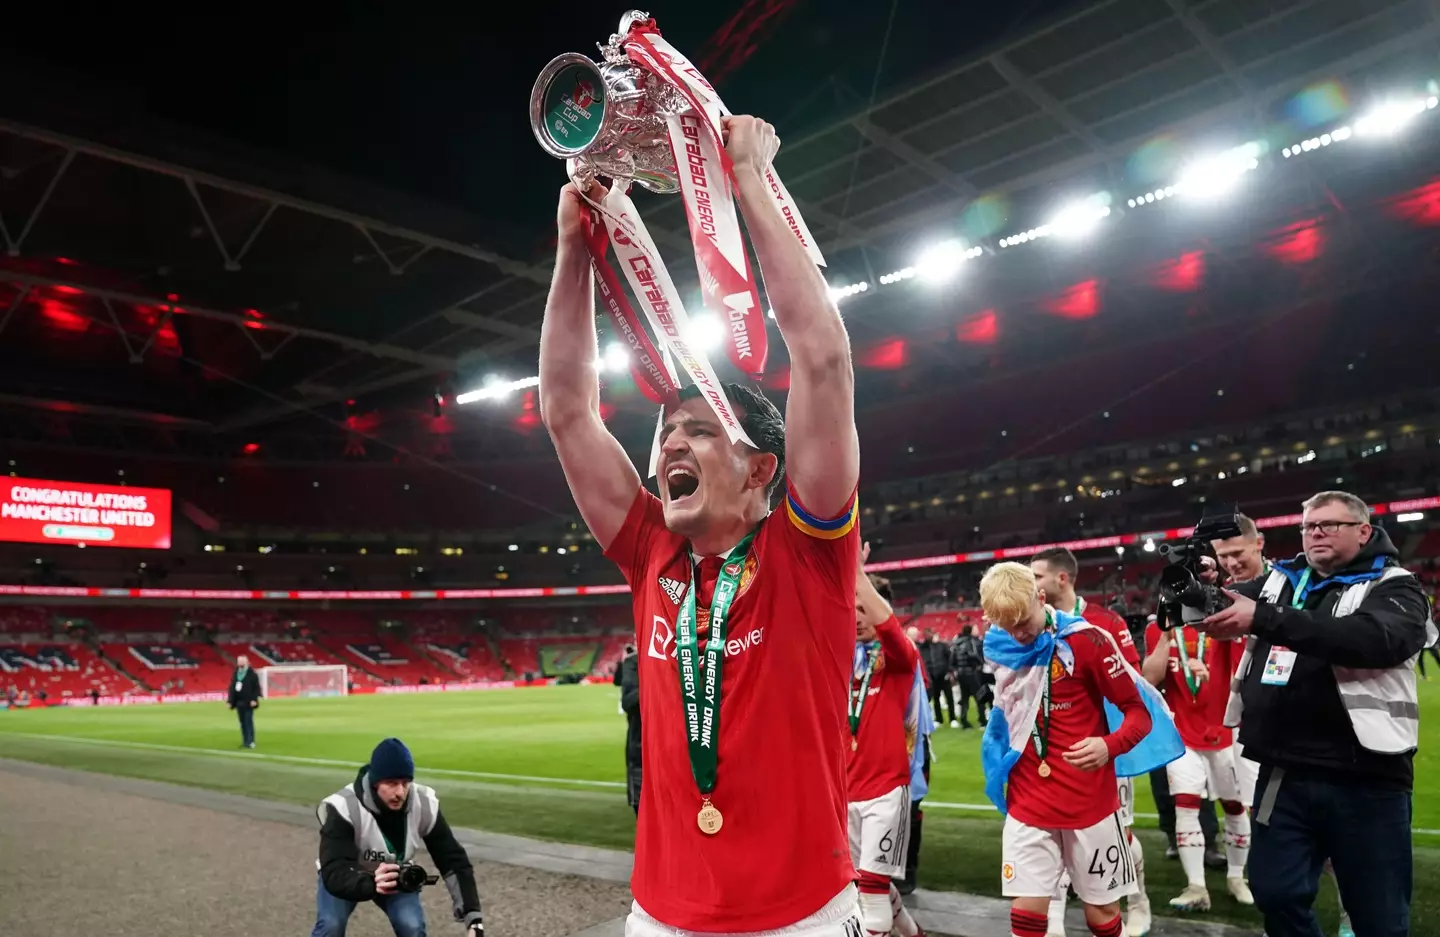 Maguire holding the Carabao Cup. (Image